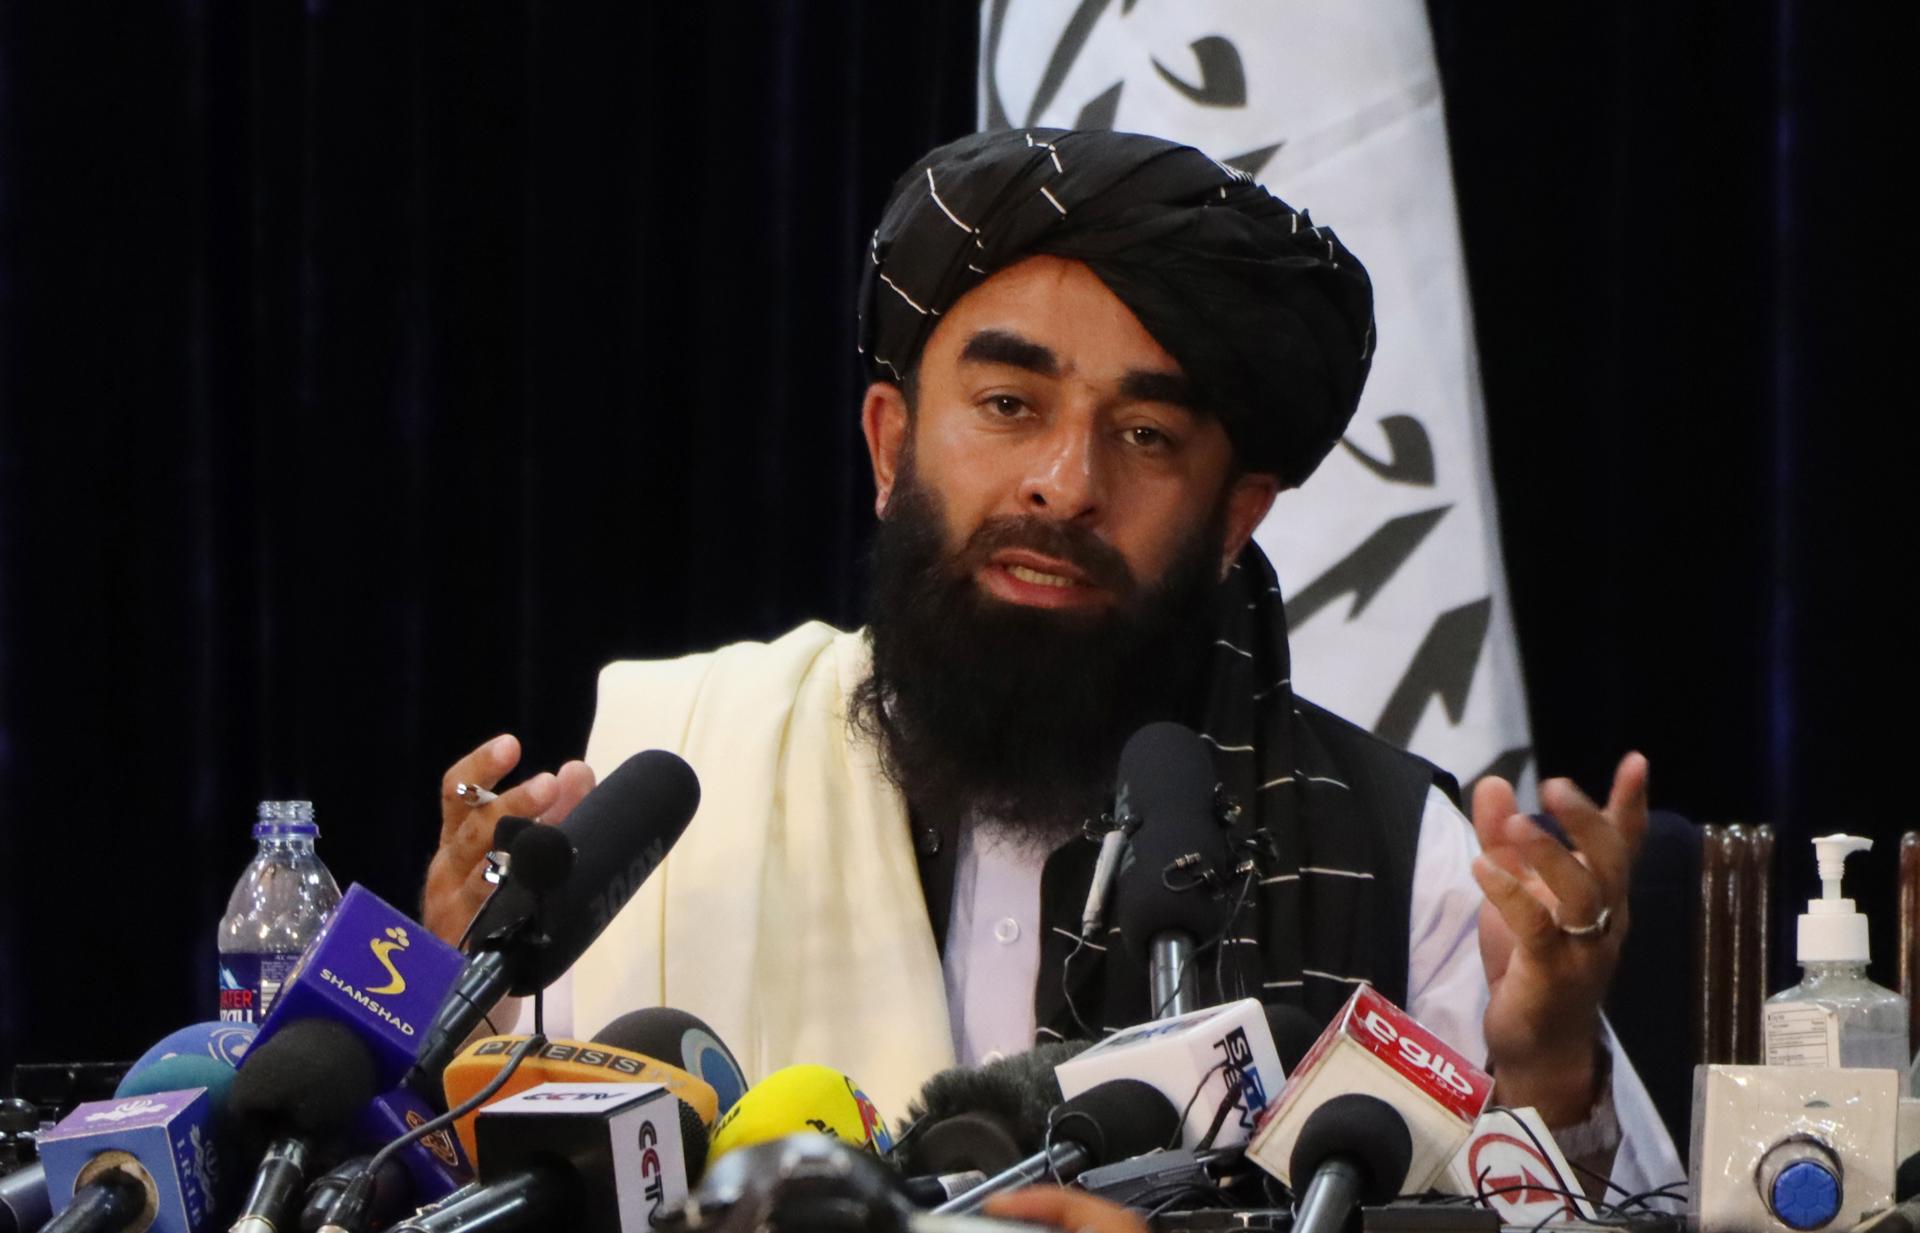 Taliban spokesperson Zabihullah Mujahid talks with journalists during a press conference in Kabul, Afghanistan, 17 August 2021. EFE/EPA/FILE/STRINGER